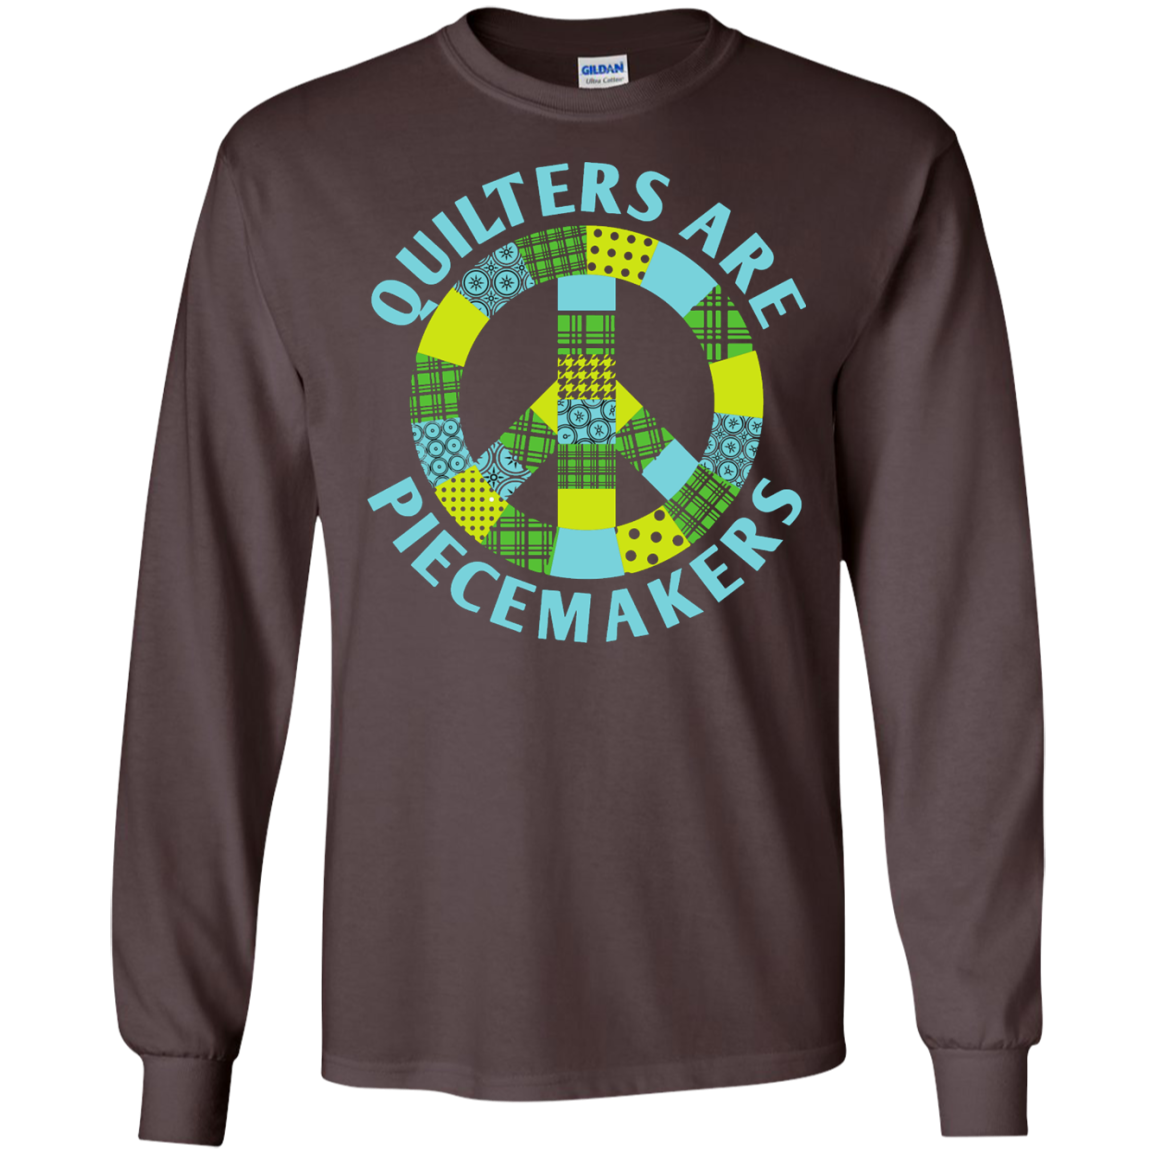 Quilters are Piecemakers Long Sleeve Ultra Cotton T-Shirt - Crafter4Life - 5